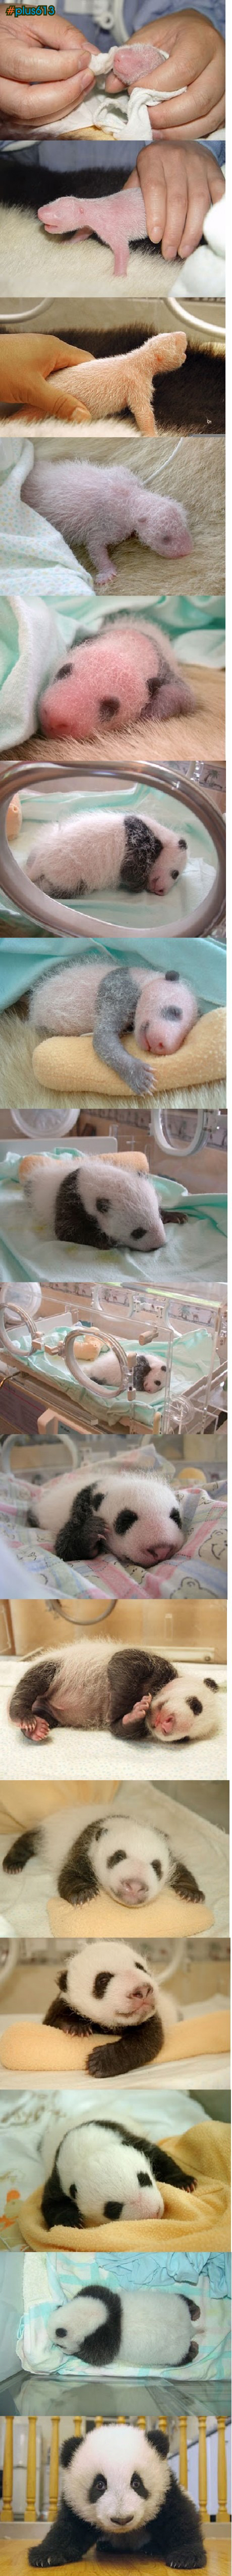 Panda the early days